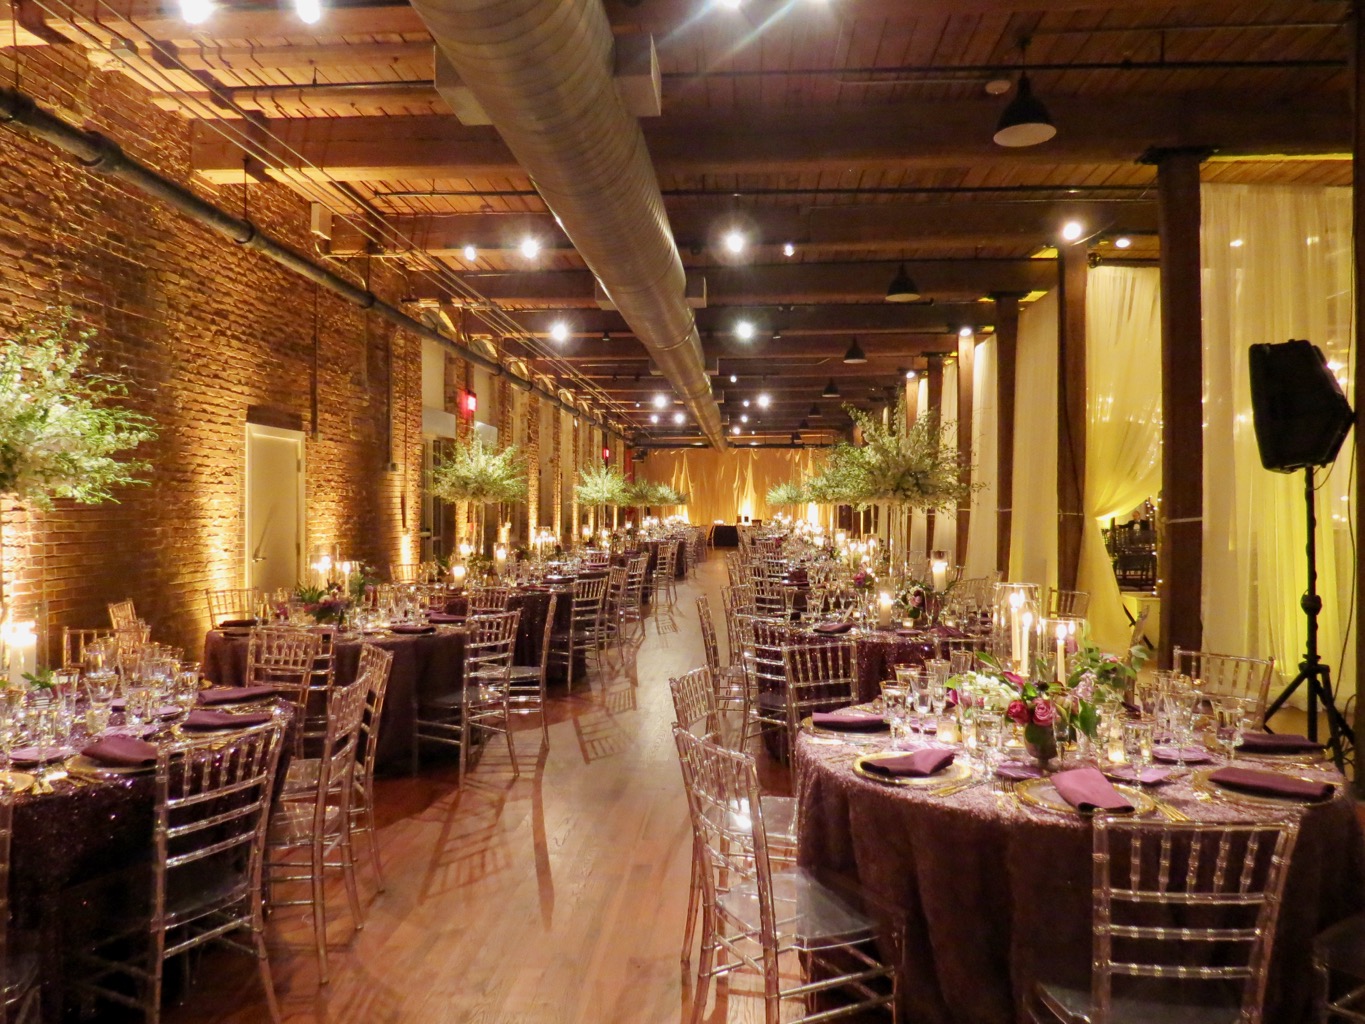  The Cloth Mill on the Eno all decked out for New Year's Eve wedding!&nbsp; 